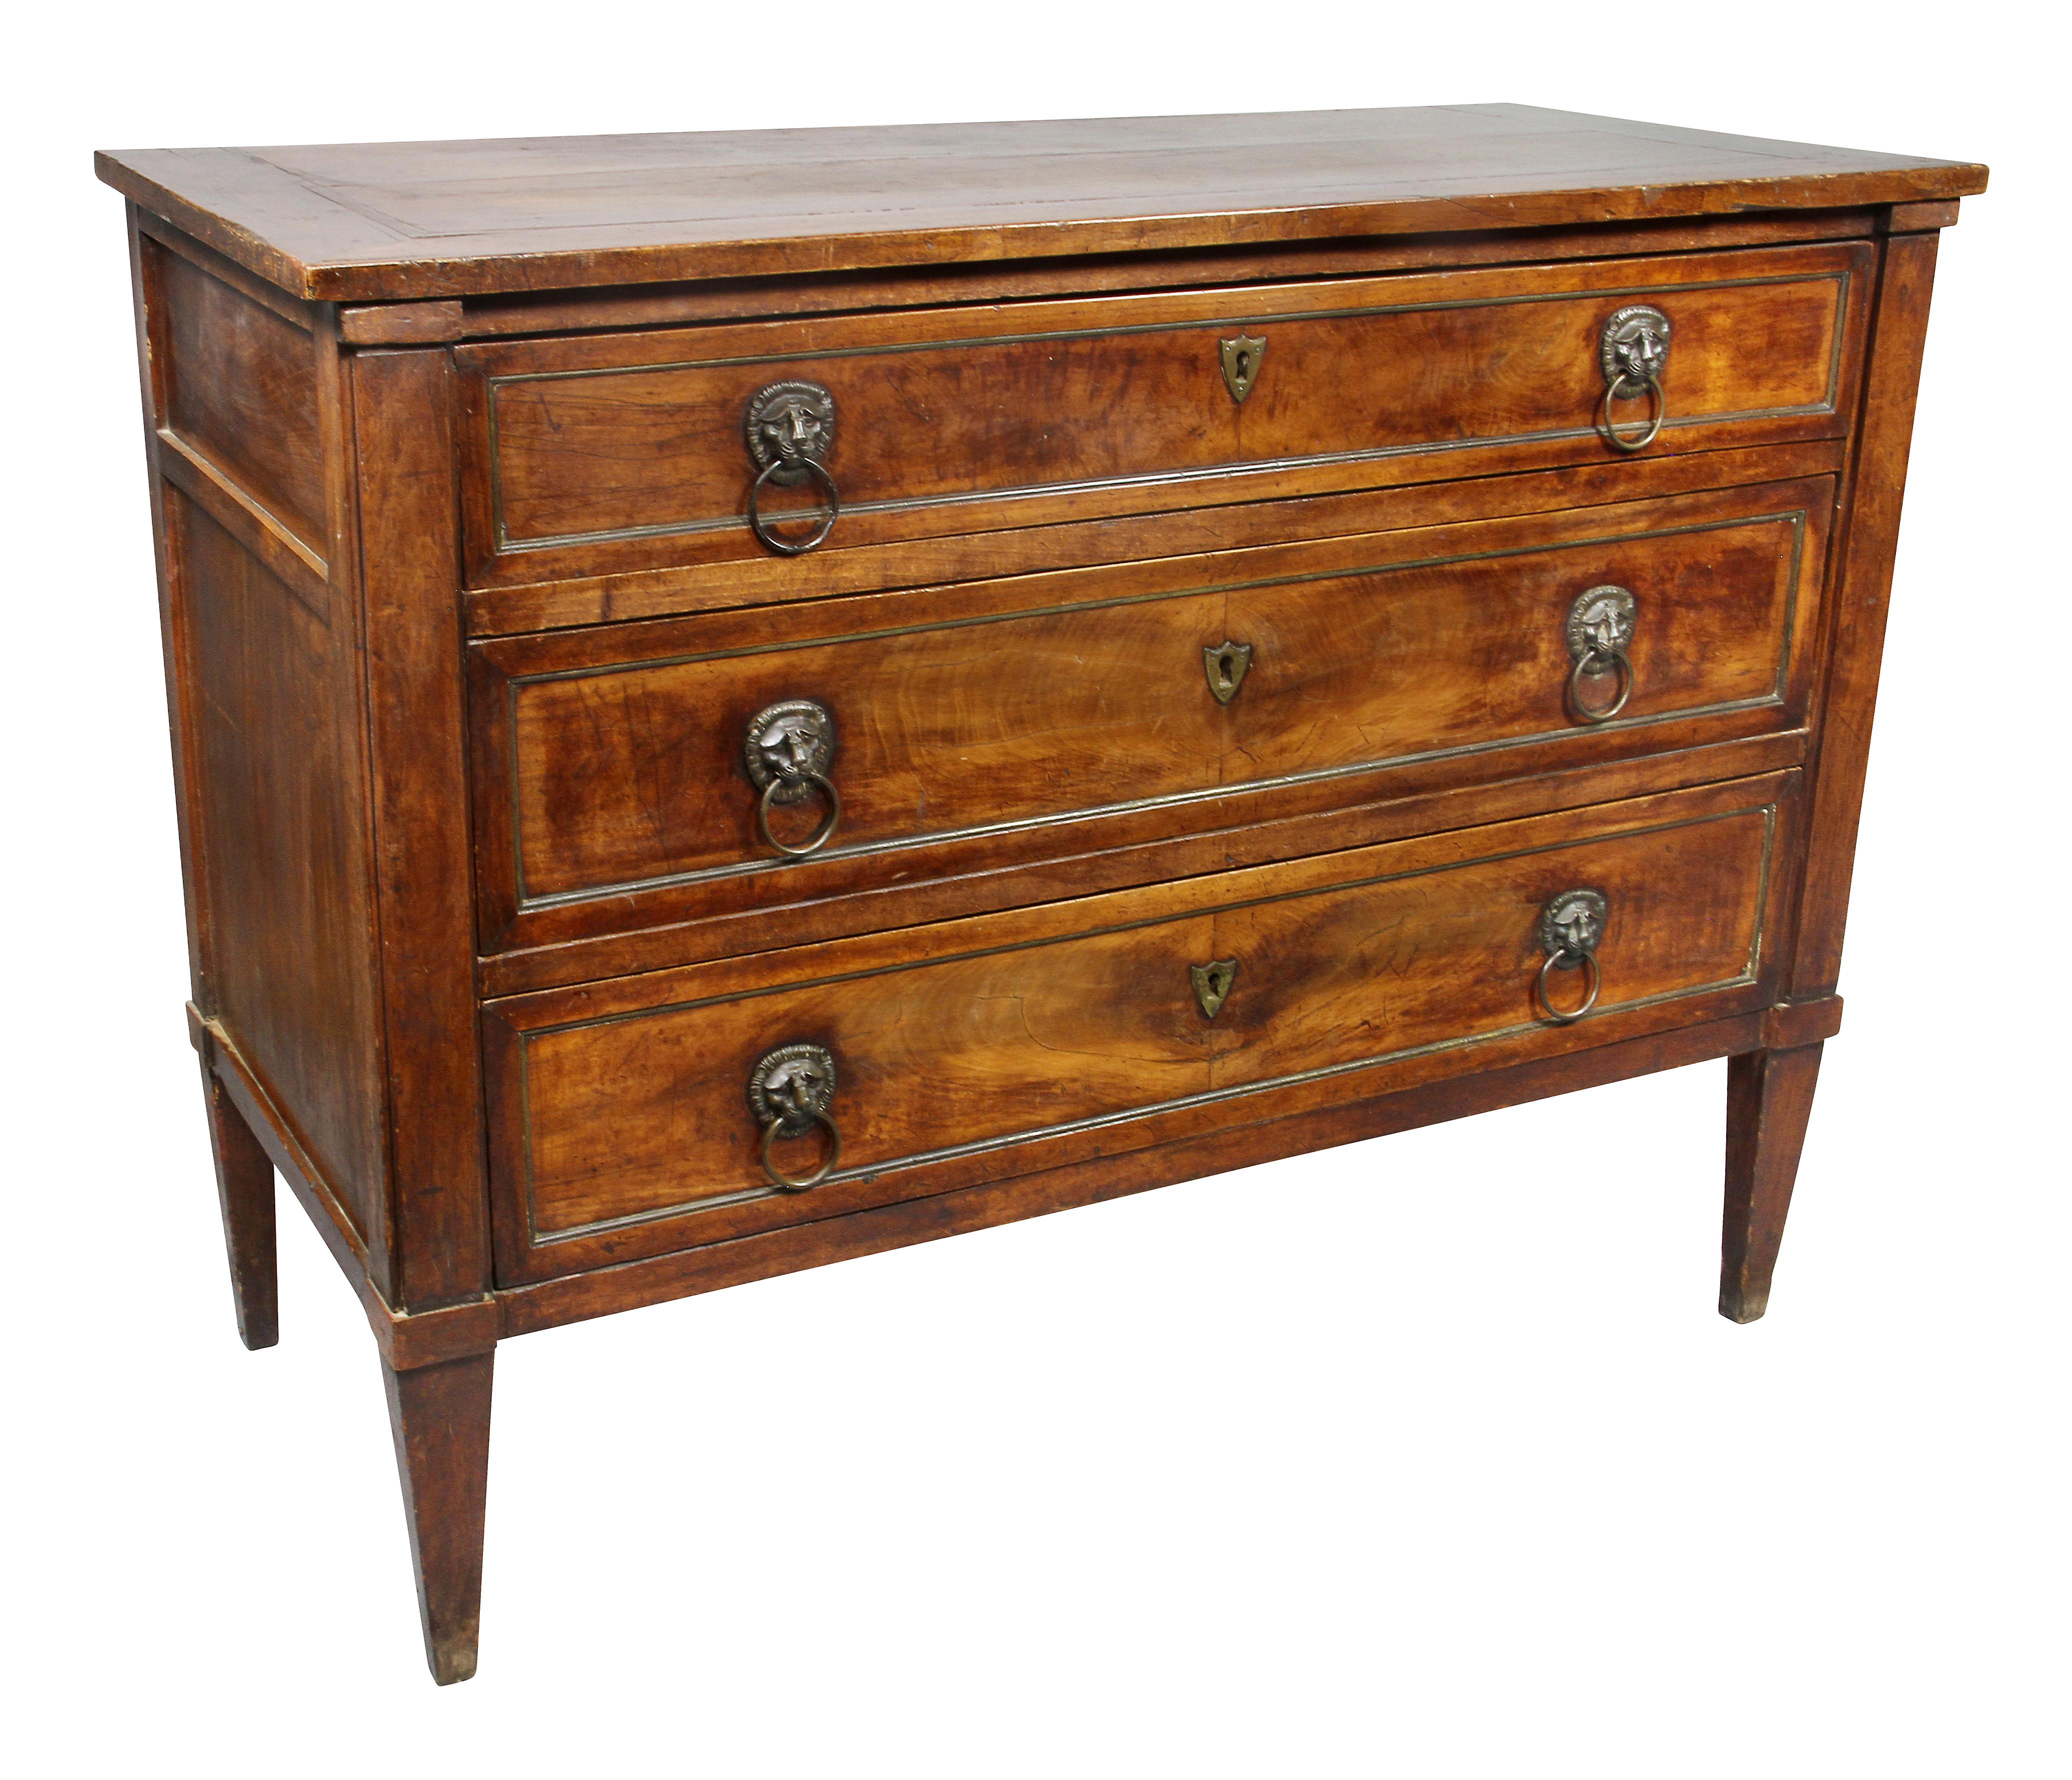 With a rectangular top over three graduated drawers with brass moldings, raised on square tapered legs. Lions head handles and shield form escutcheons.